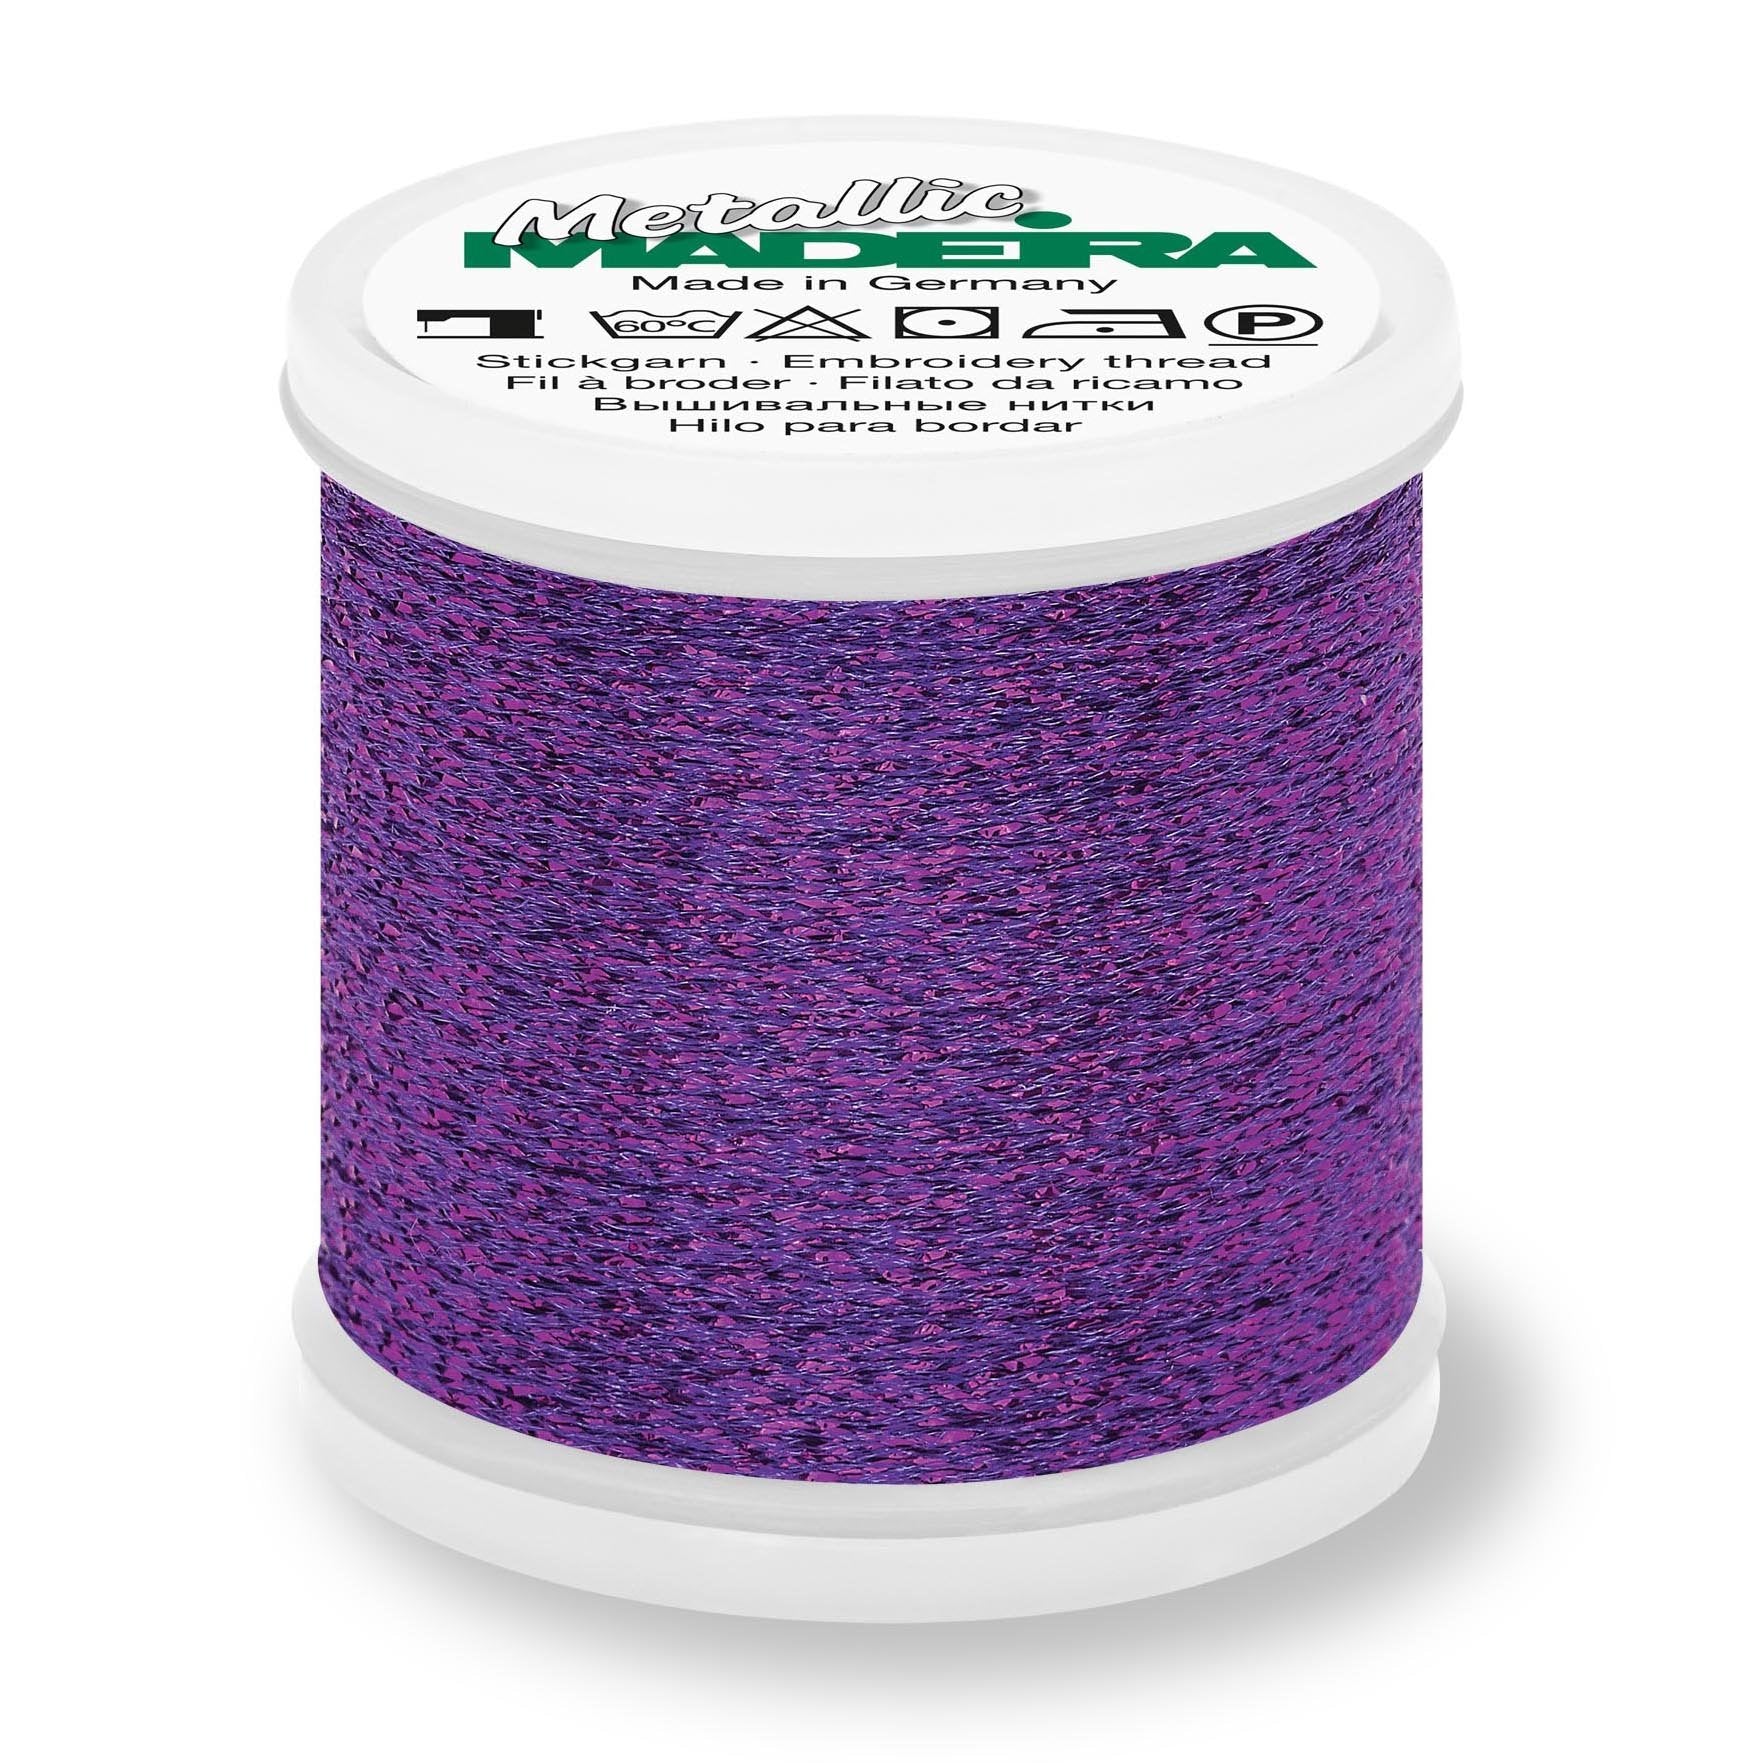 Madeira Textured Metallic Embroidery Thread, 200m Purple from Jaycotts Sewing Supplies